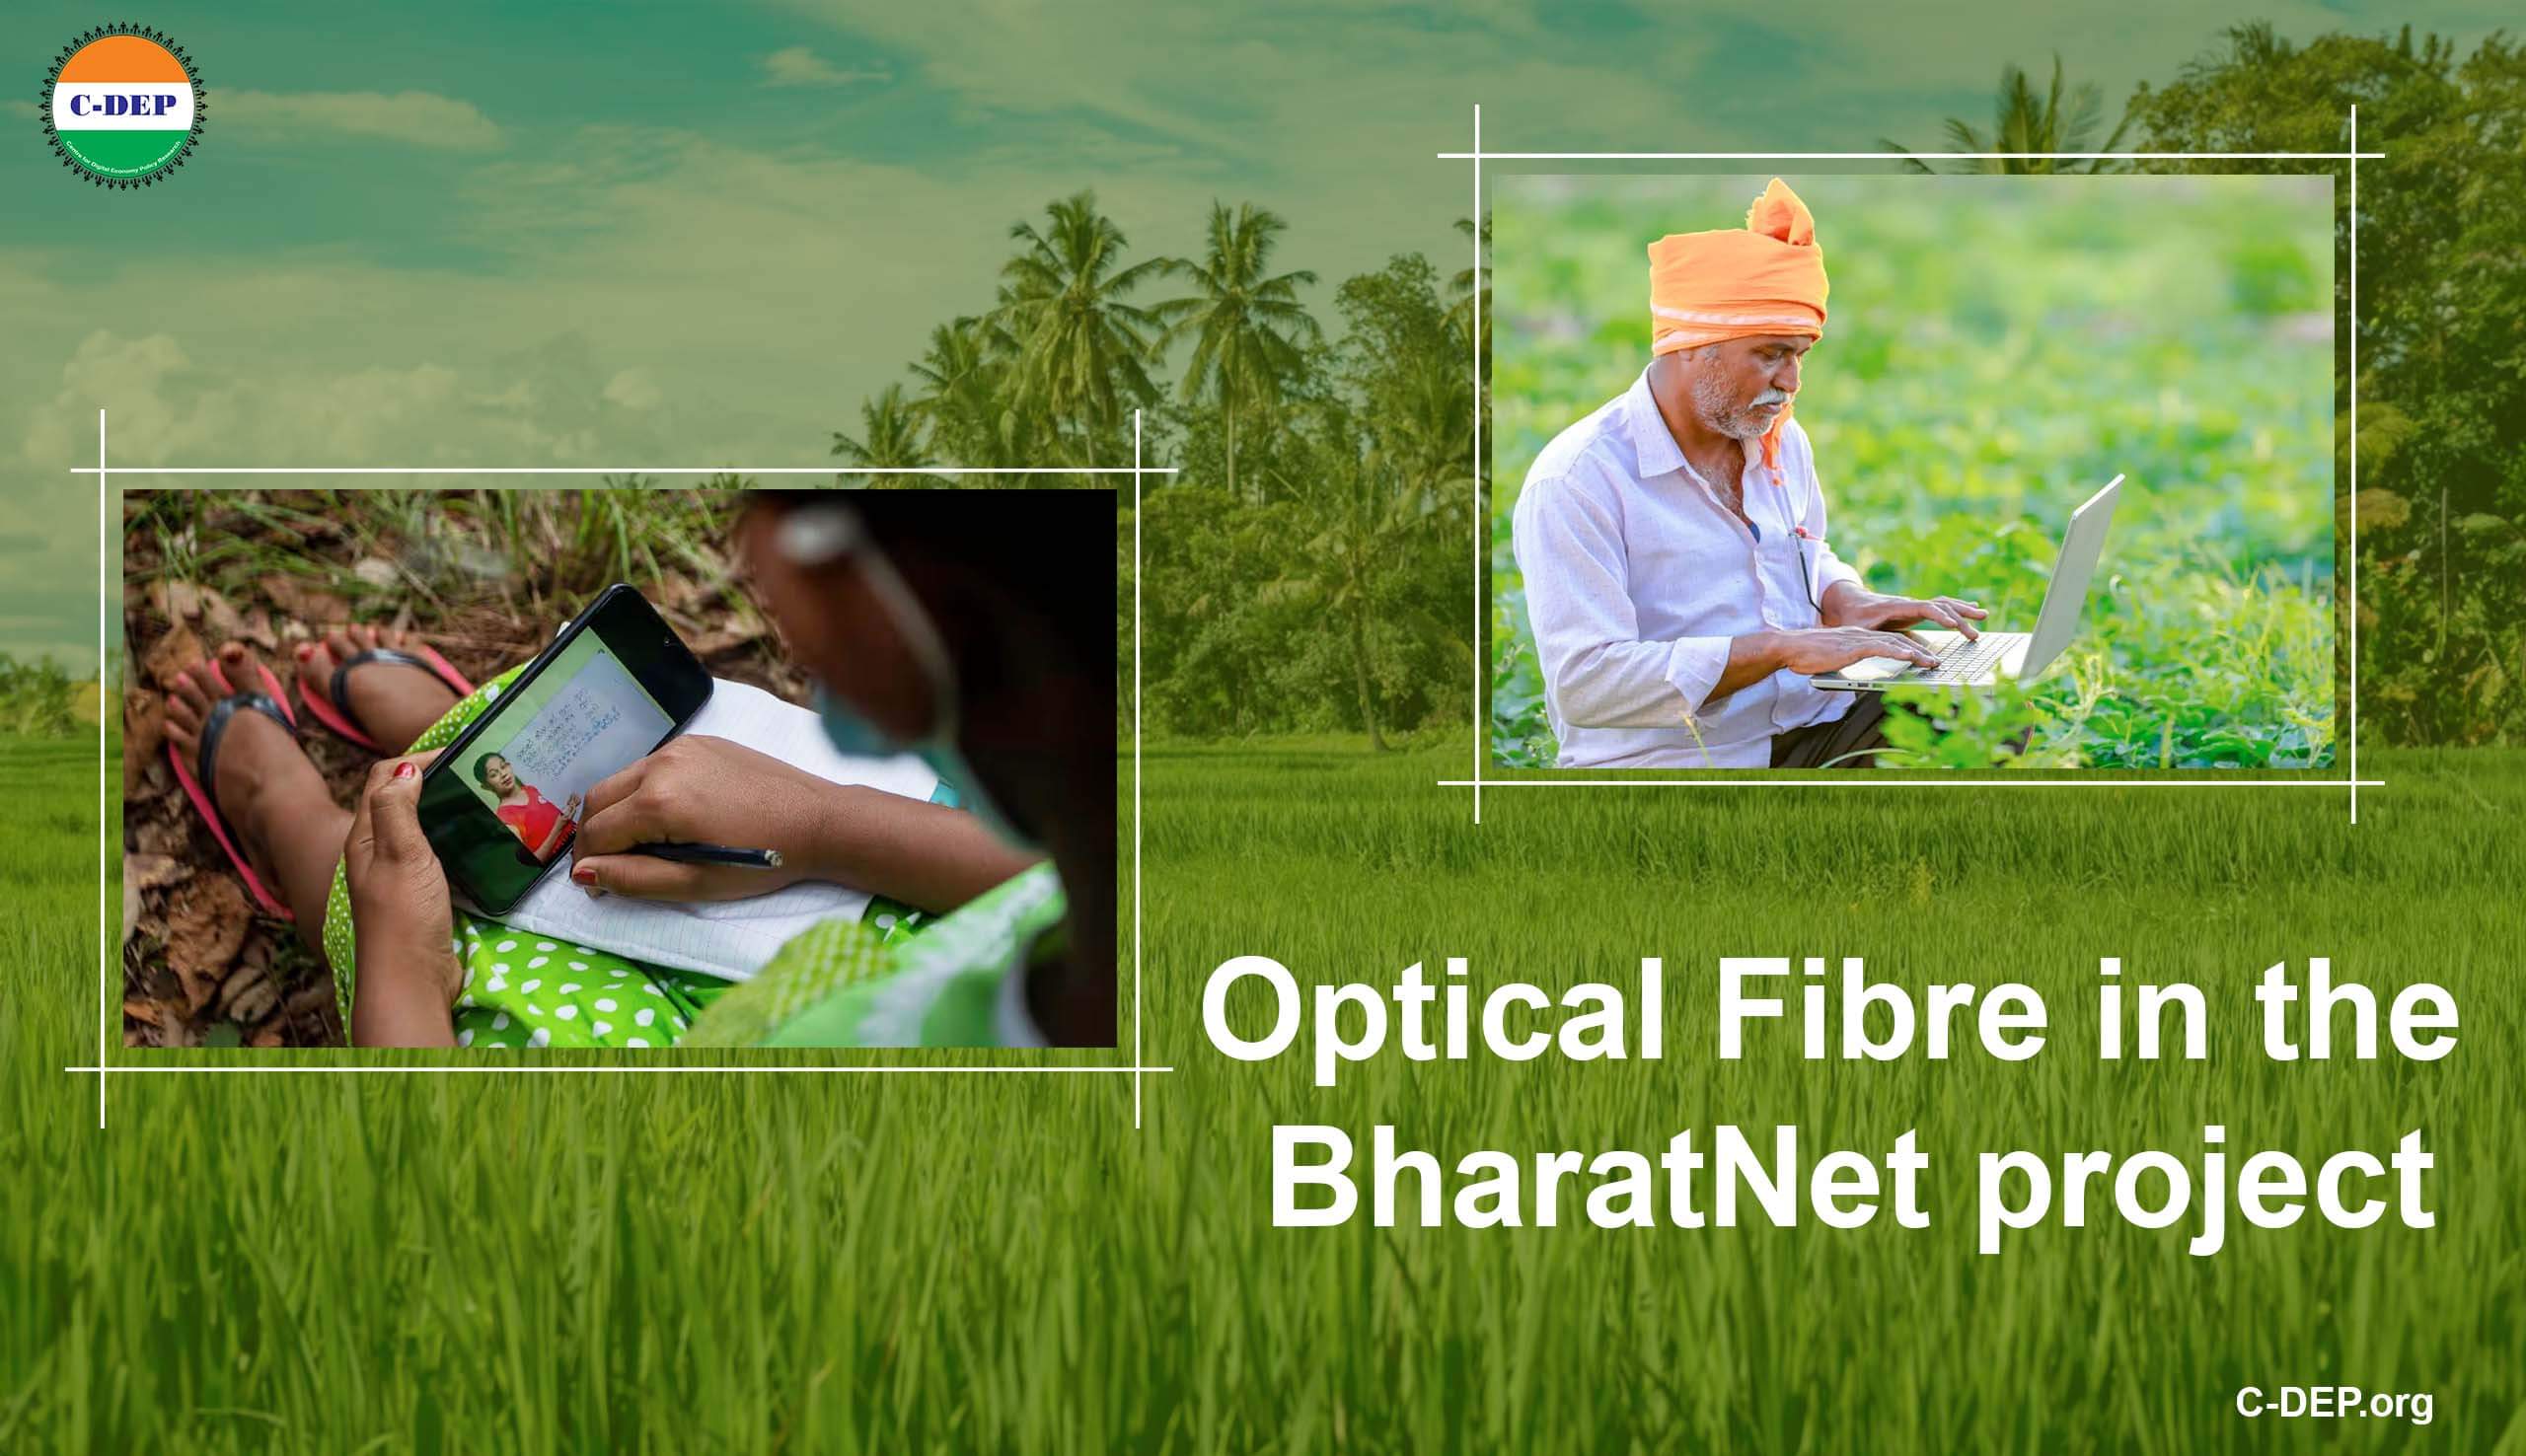 Optical Fibre in the BharatNet project